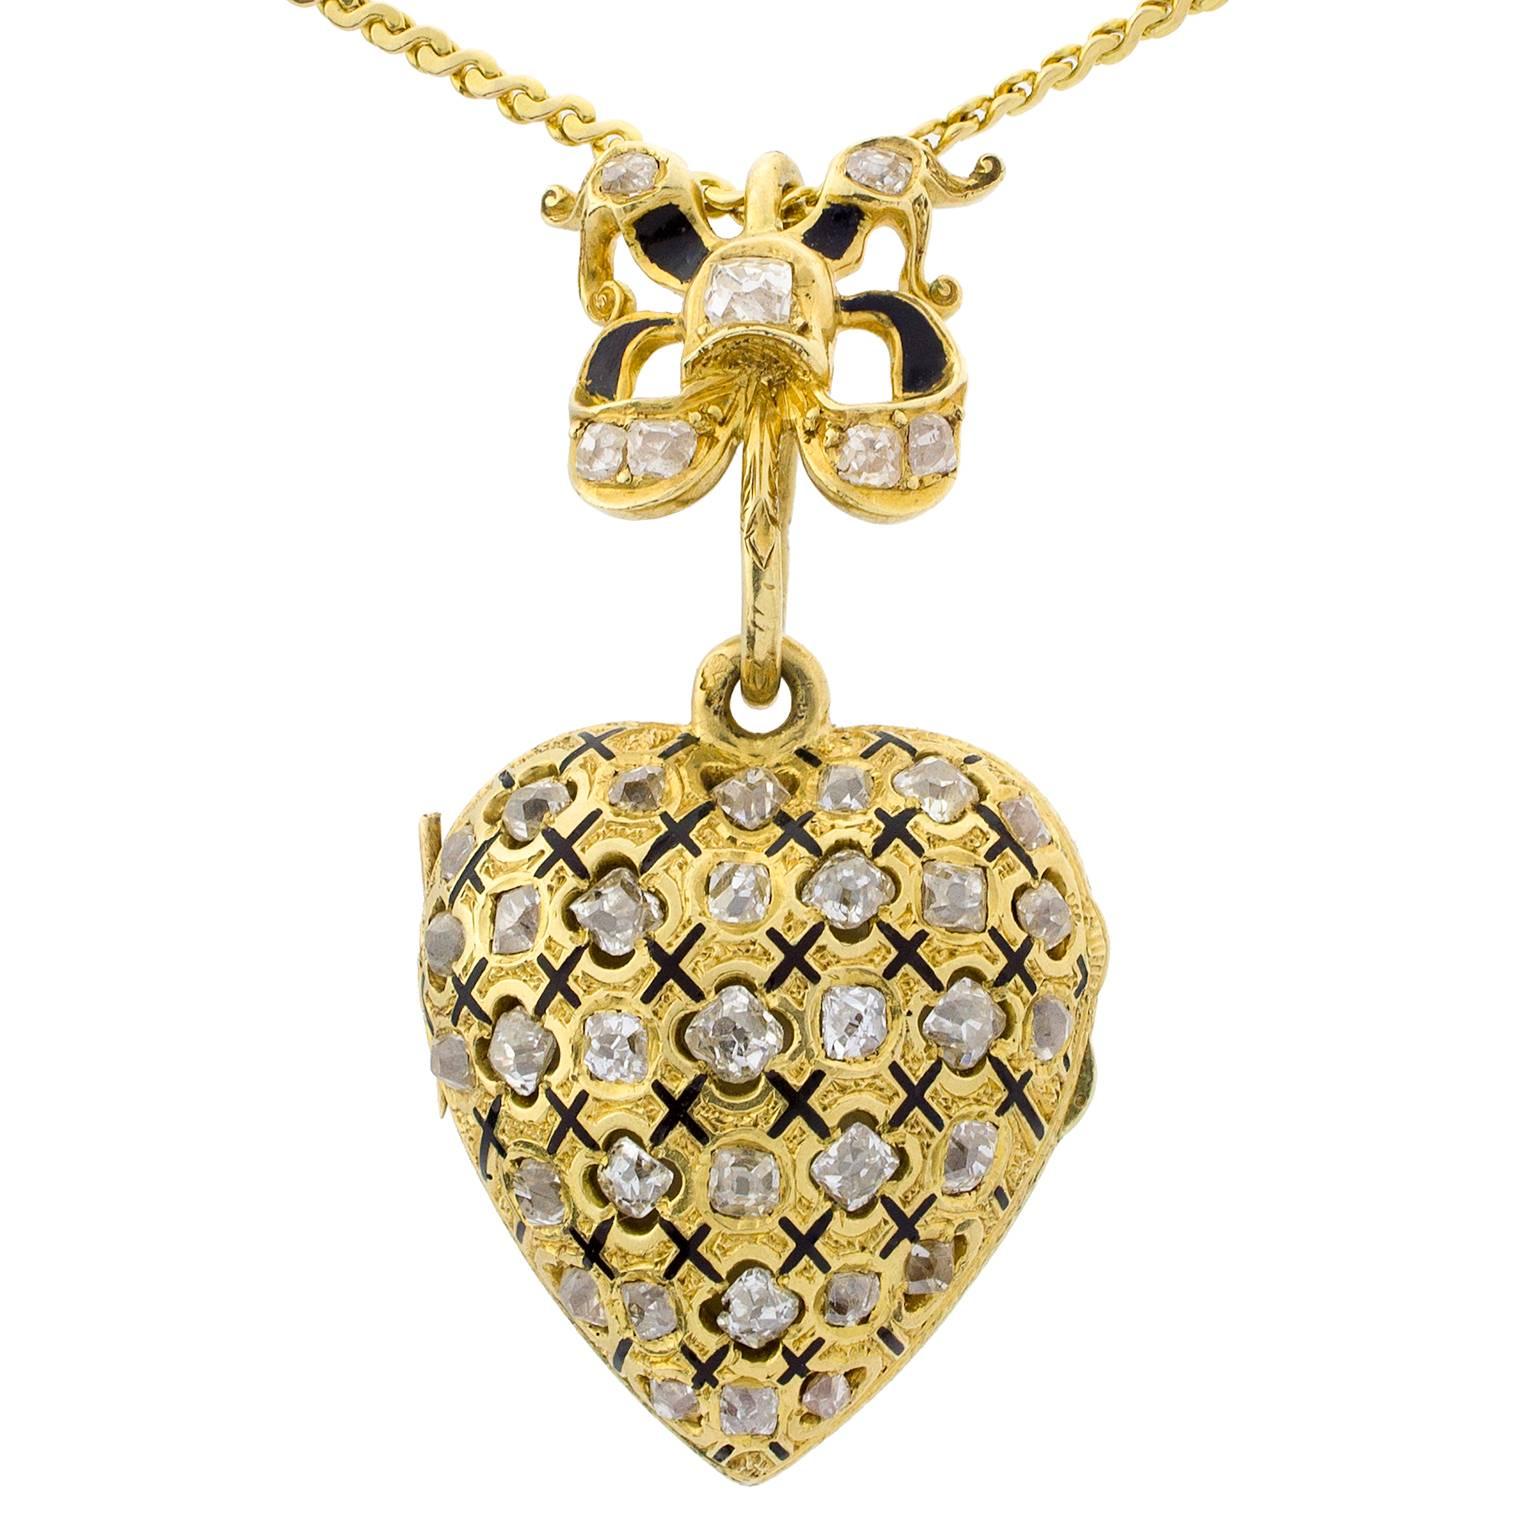 Late 19th century heart-shaped gold locket with gold chain, set with single cut diamonds, with a total weight of 1.90 carats, decorated with enamel. Initials can be seen on the back.